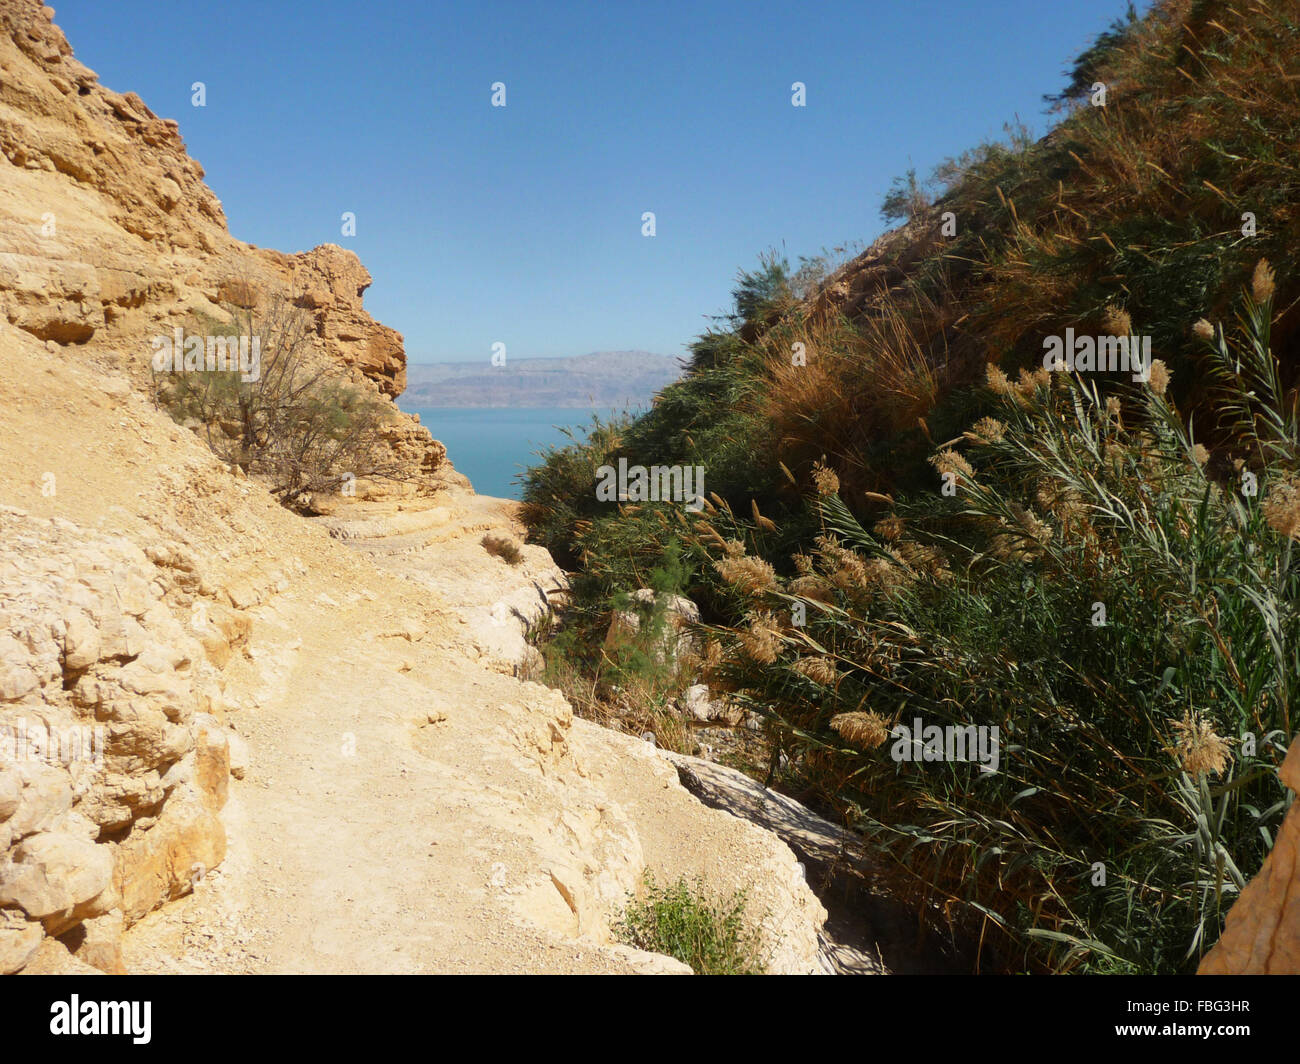 Beautiful hiking trail with a view of the dead sea in the background in Ein Gedi Nature Reserve, Israel Stock Photo